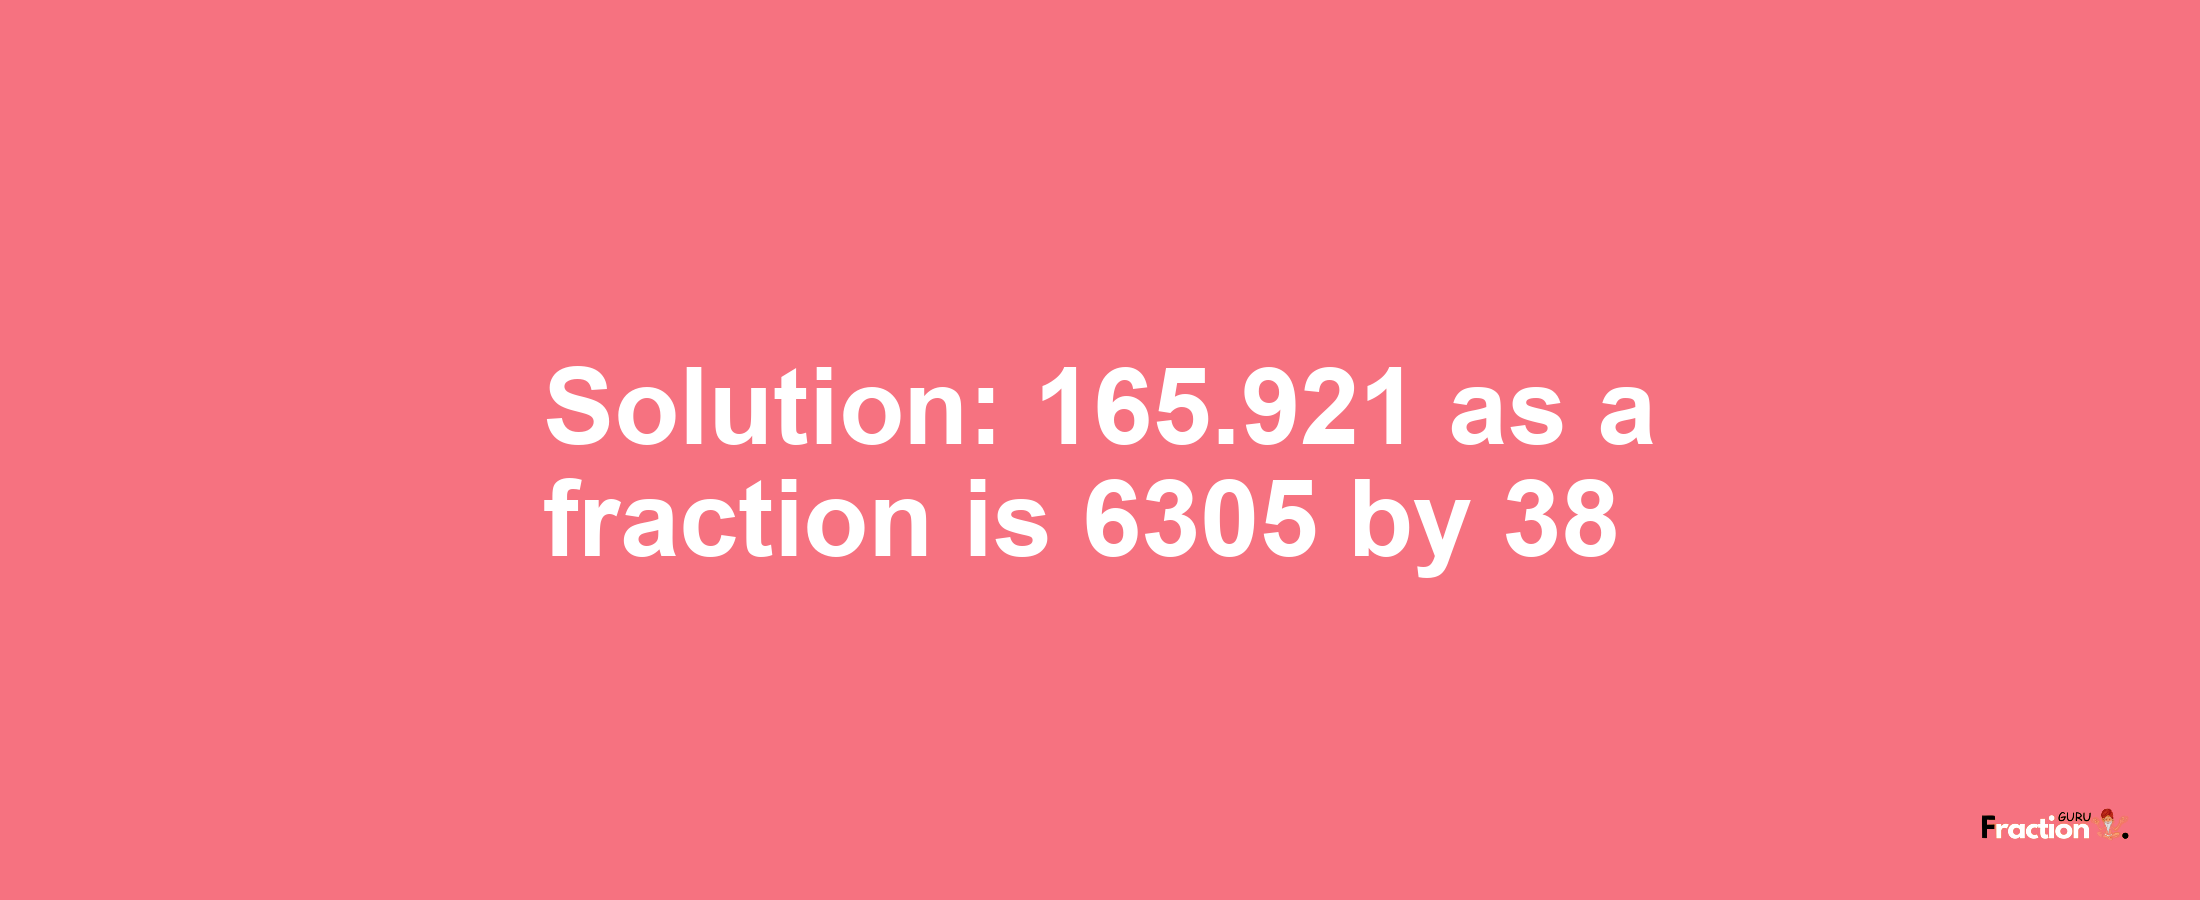 Solution:165.921 as a fraction is 6305/38